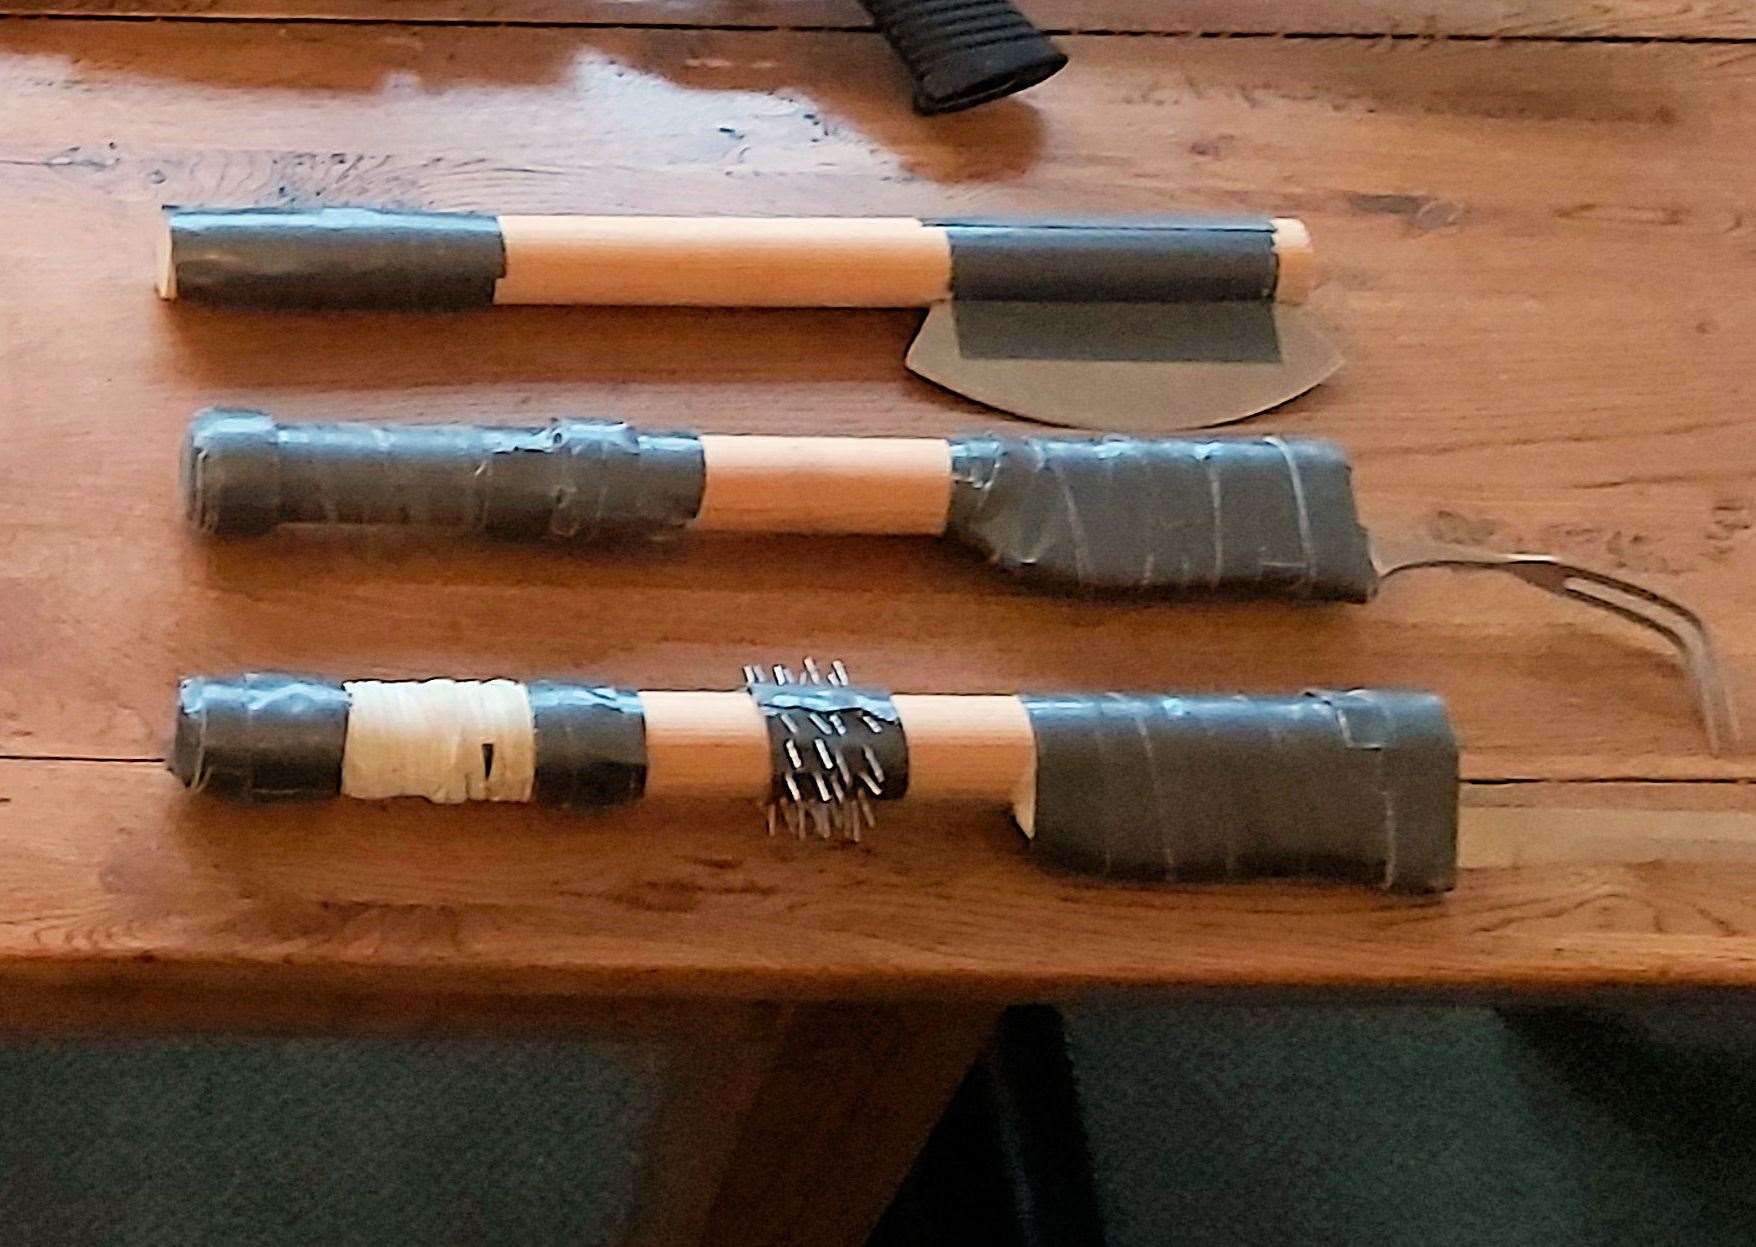 The weapons found during the drugs raid Picture: Kent Police